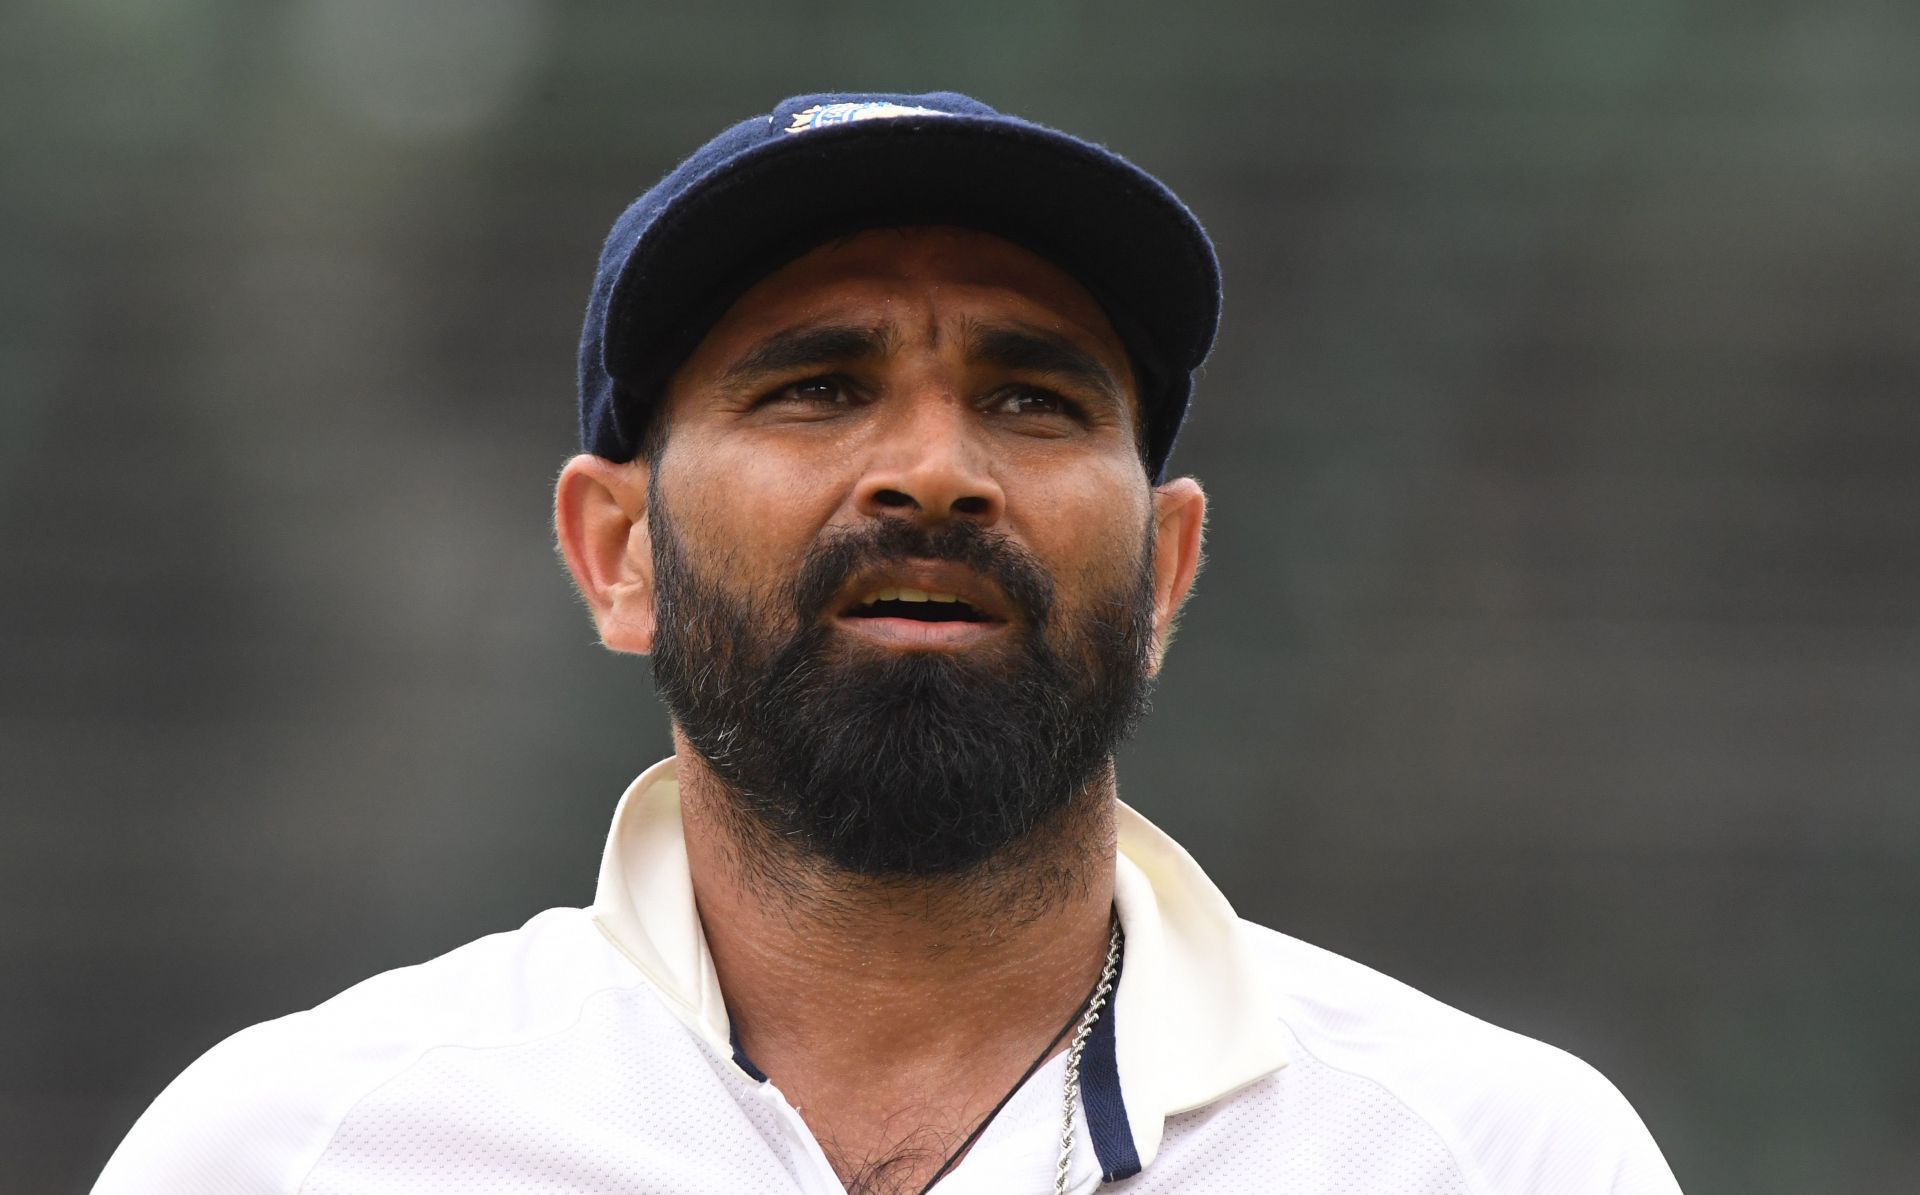 Mohammed Shami has played Tests and ODIs for India regularly (Image: Getty)